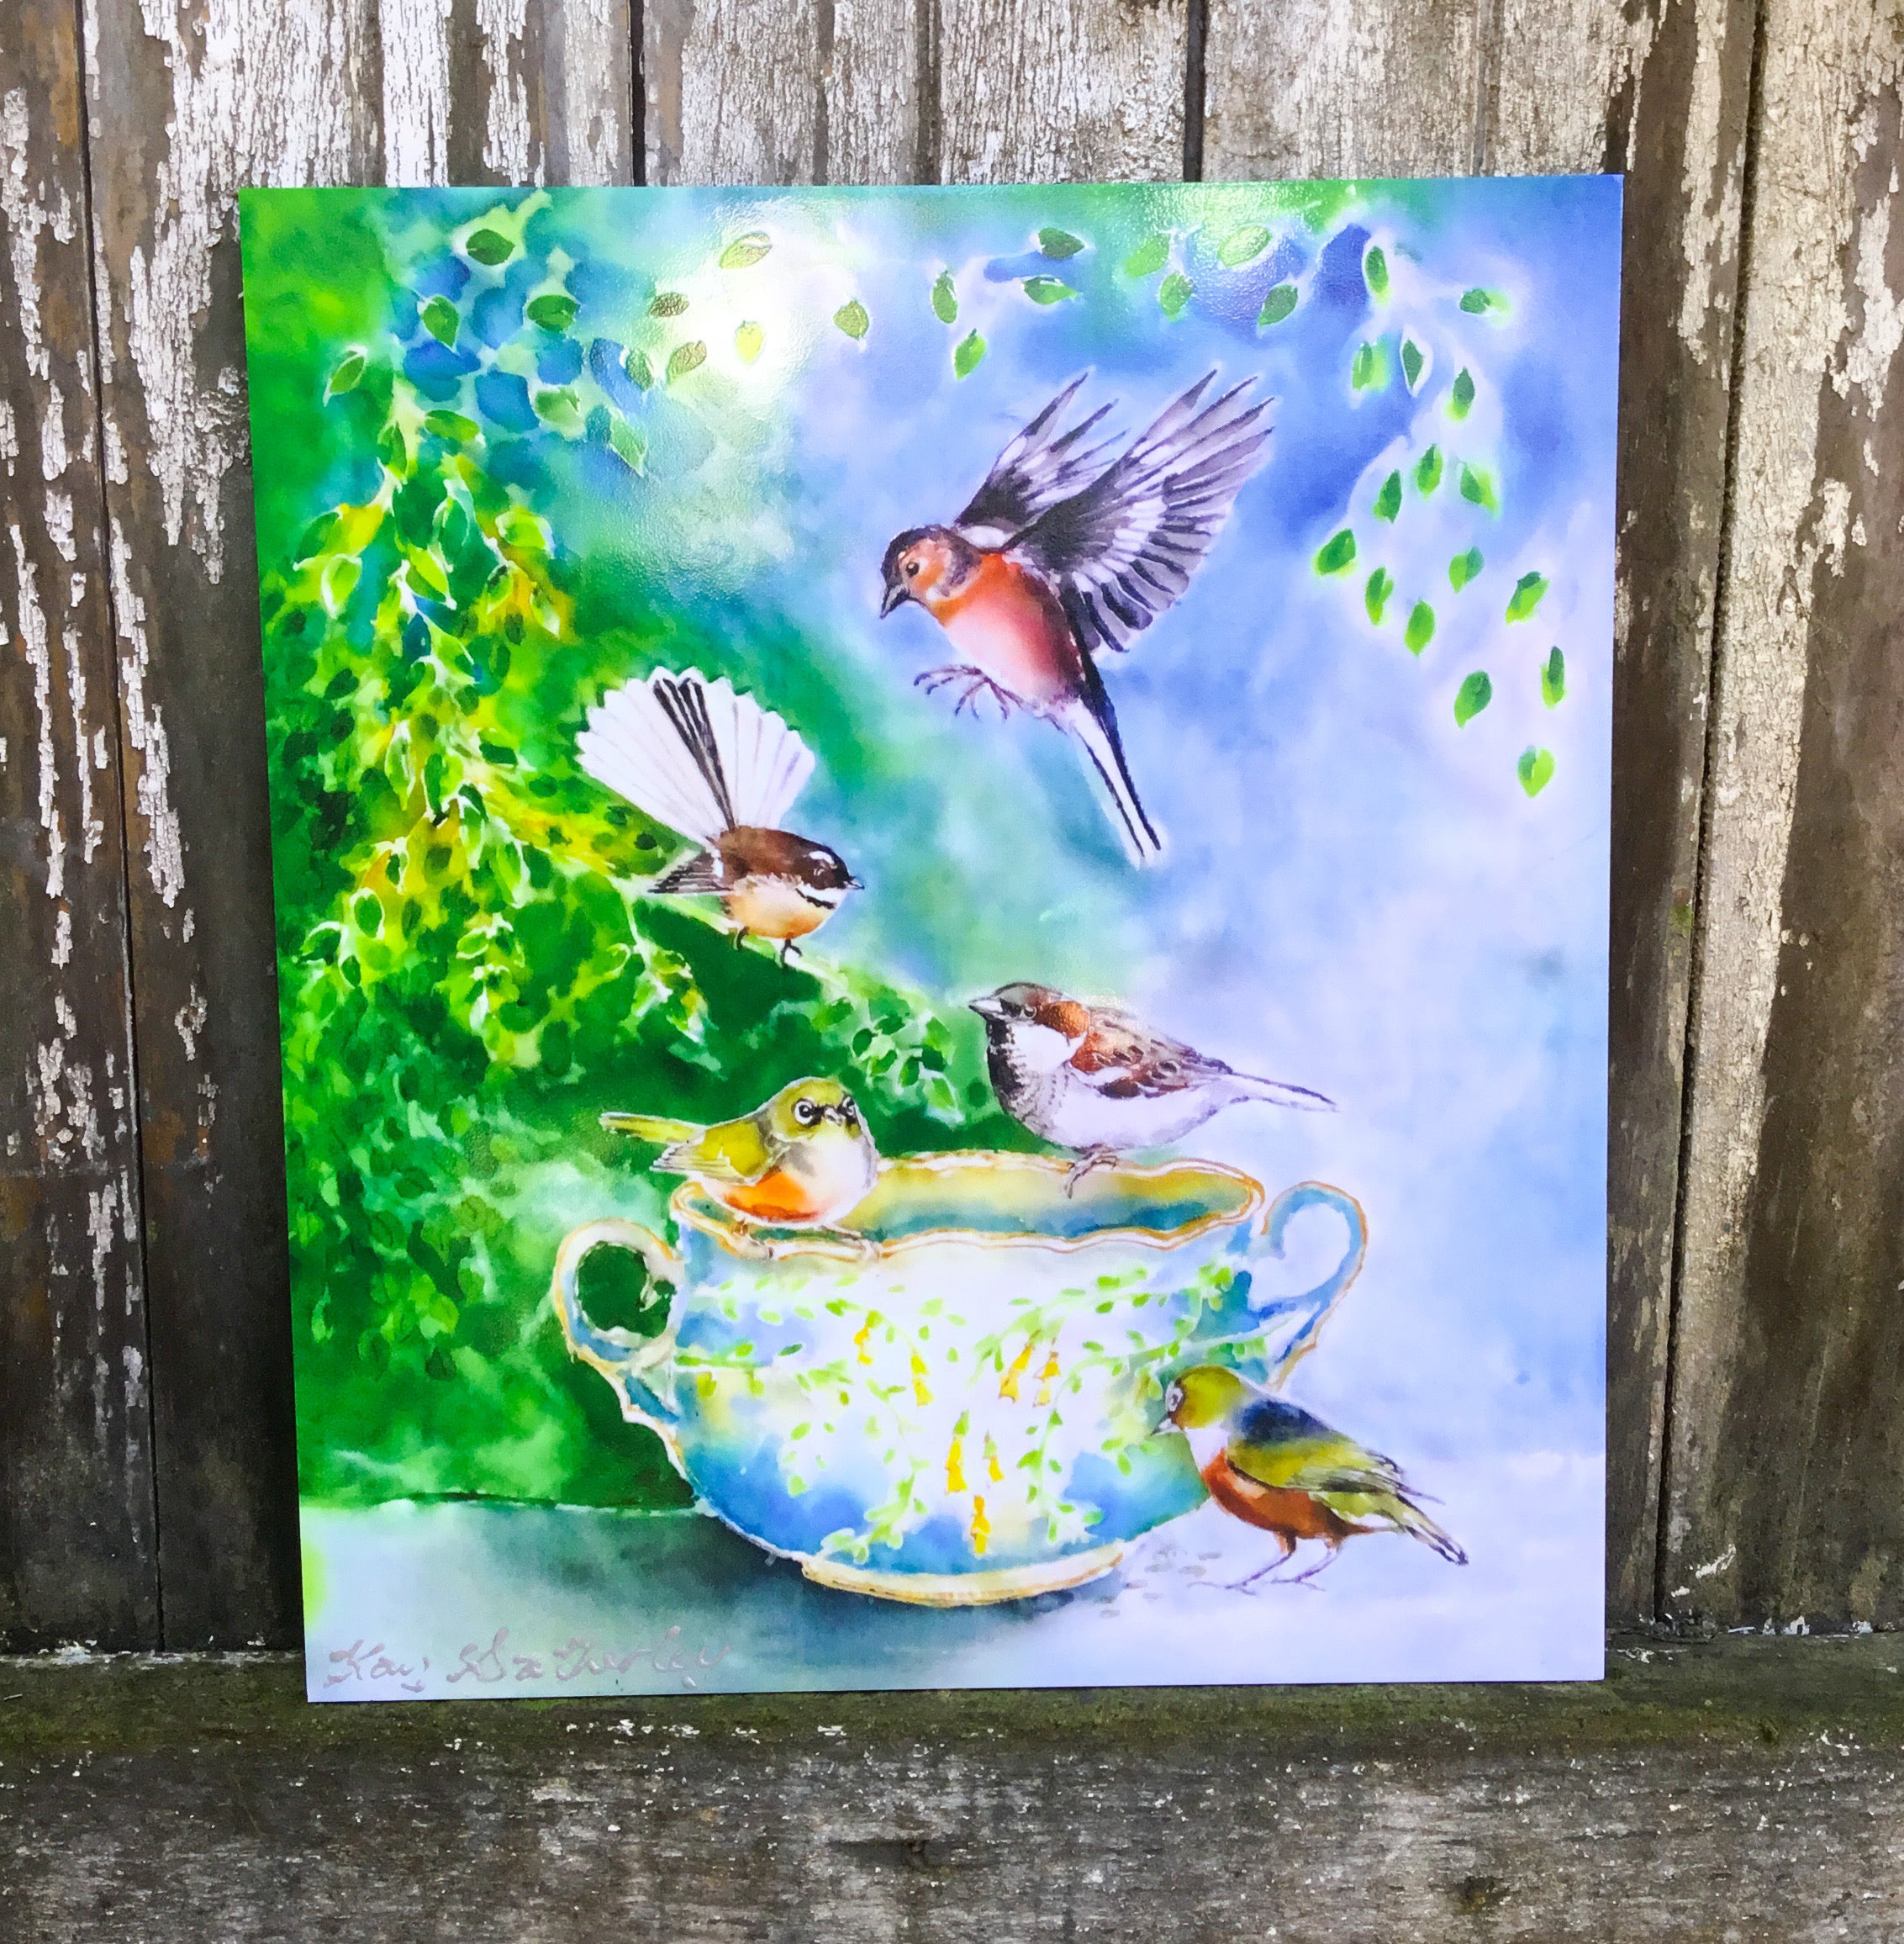 Small birds, SilverEyes, Chaffinch, Fantail and Sparrow on Vintage China - Outdoor Art Squarish